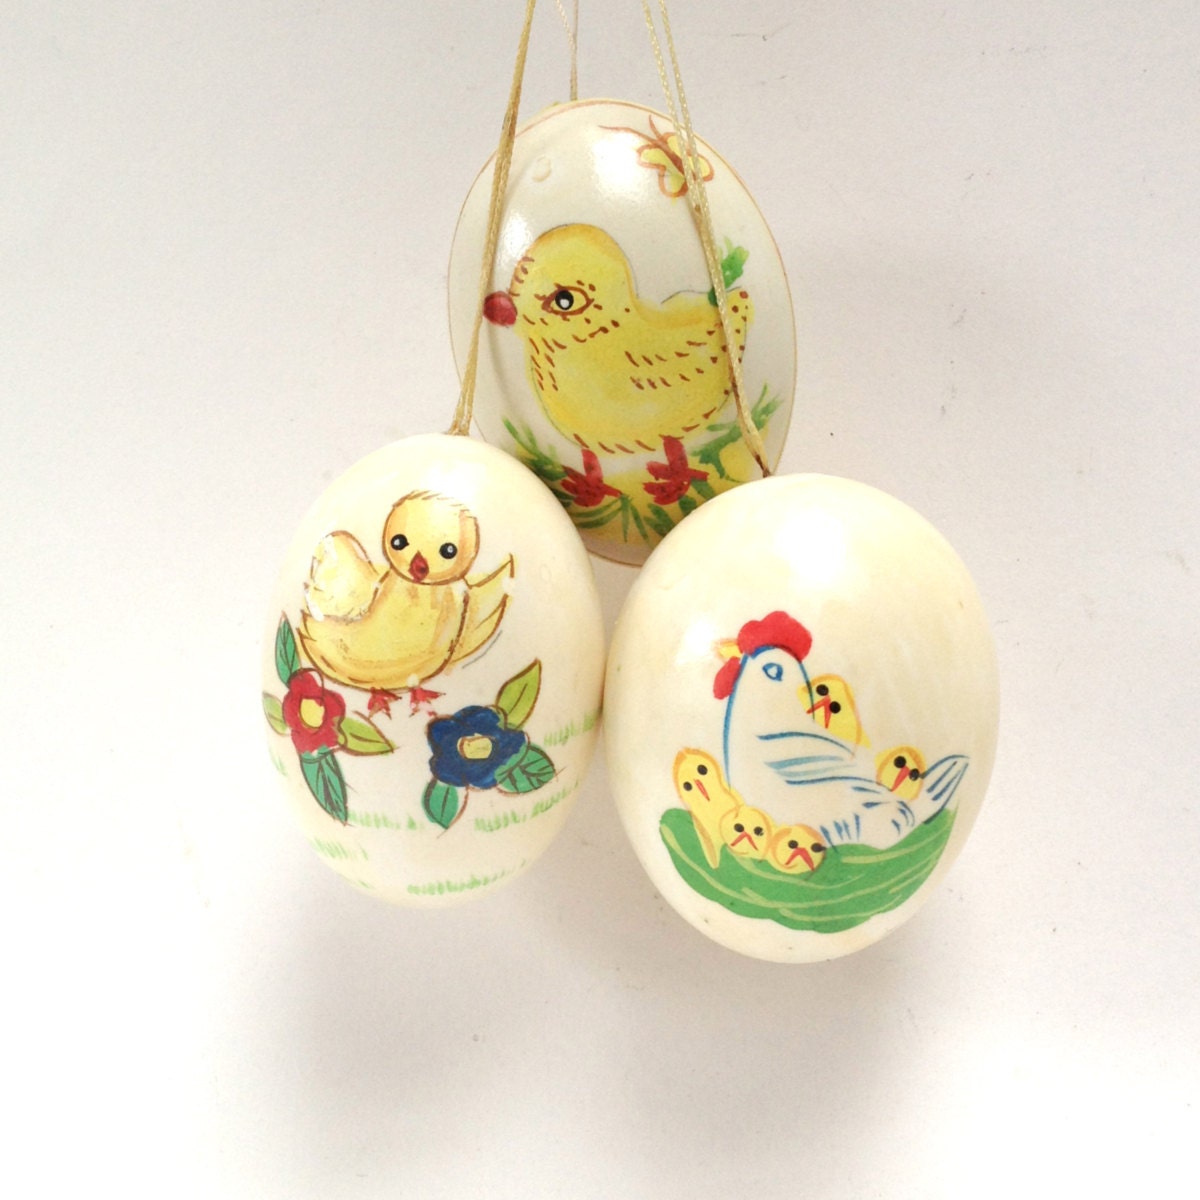 Vintage hand-painted Easter eggs, three different designs with chicks - vintagecuriosityshop